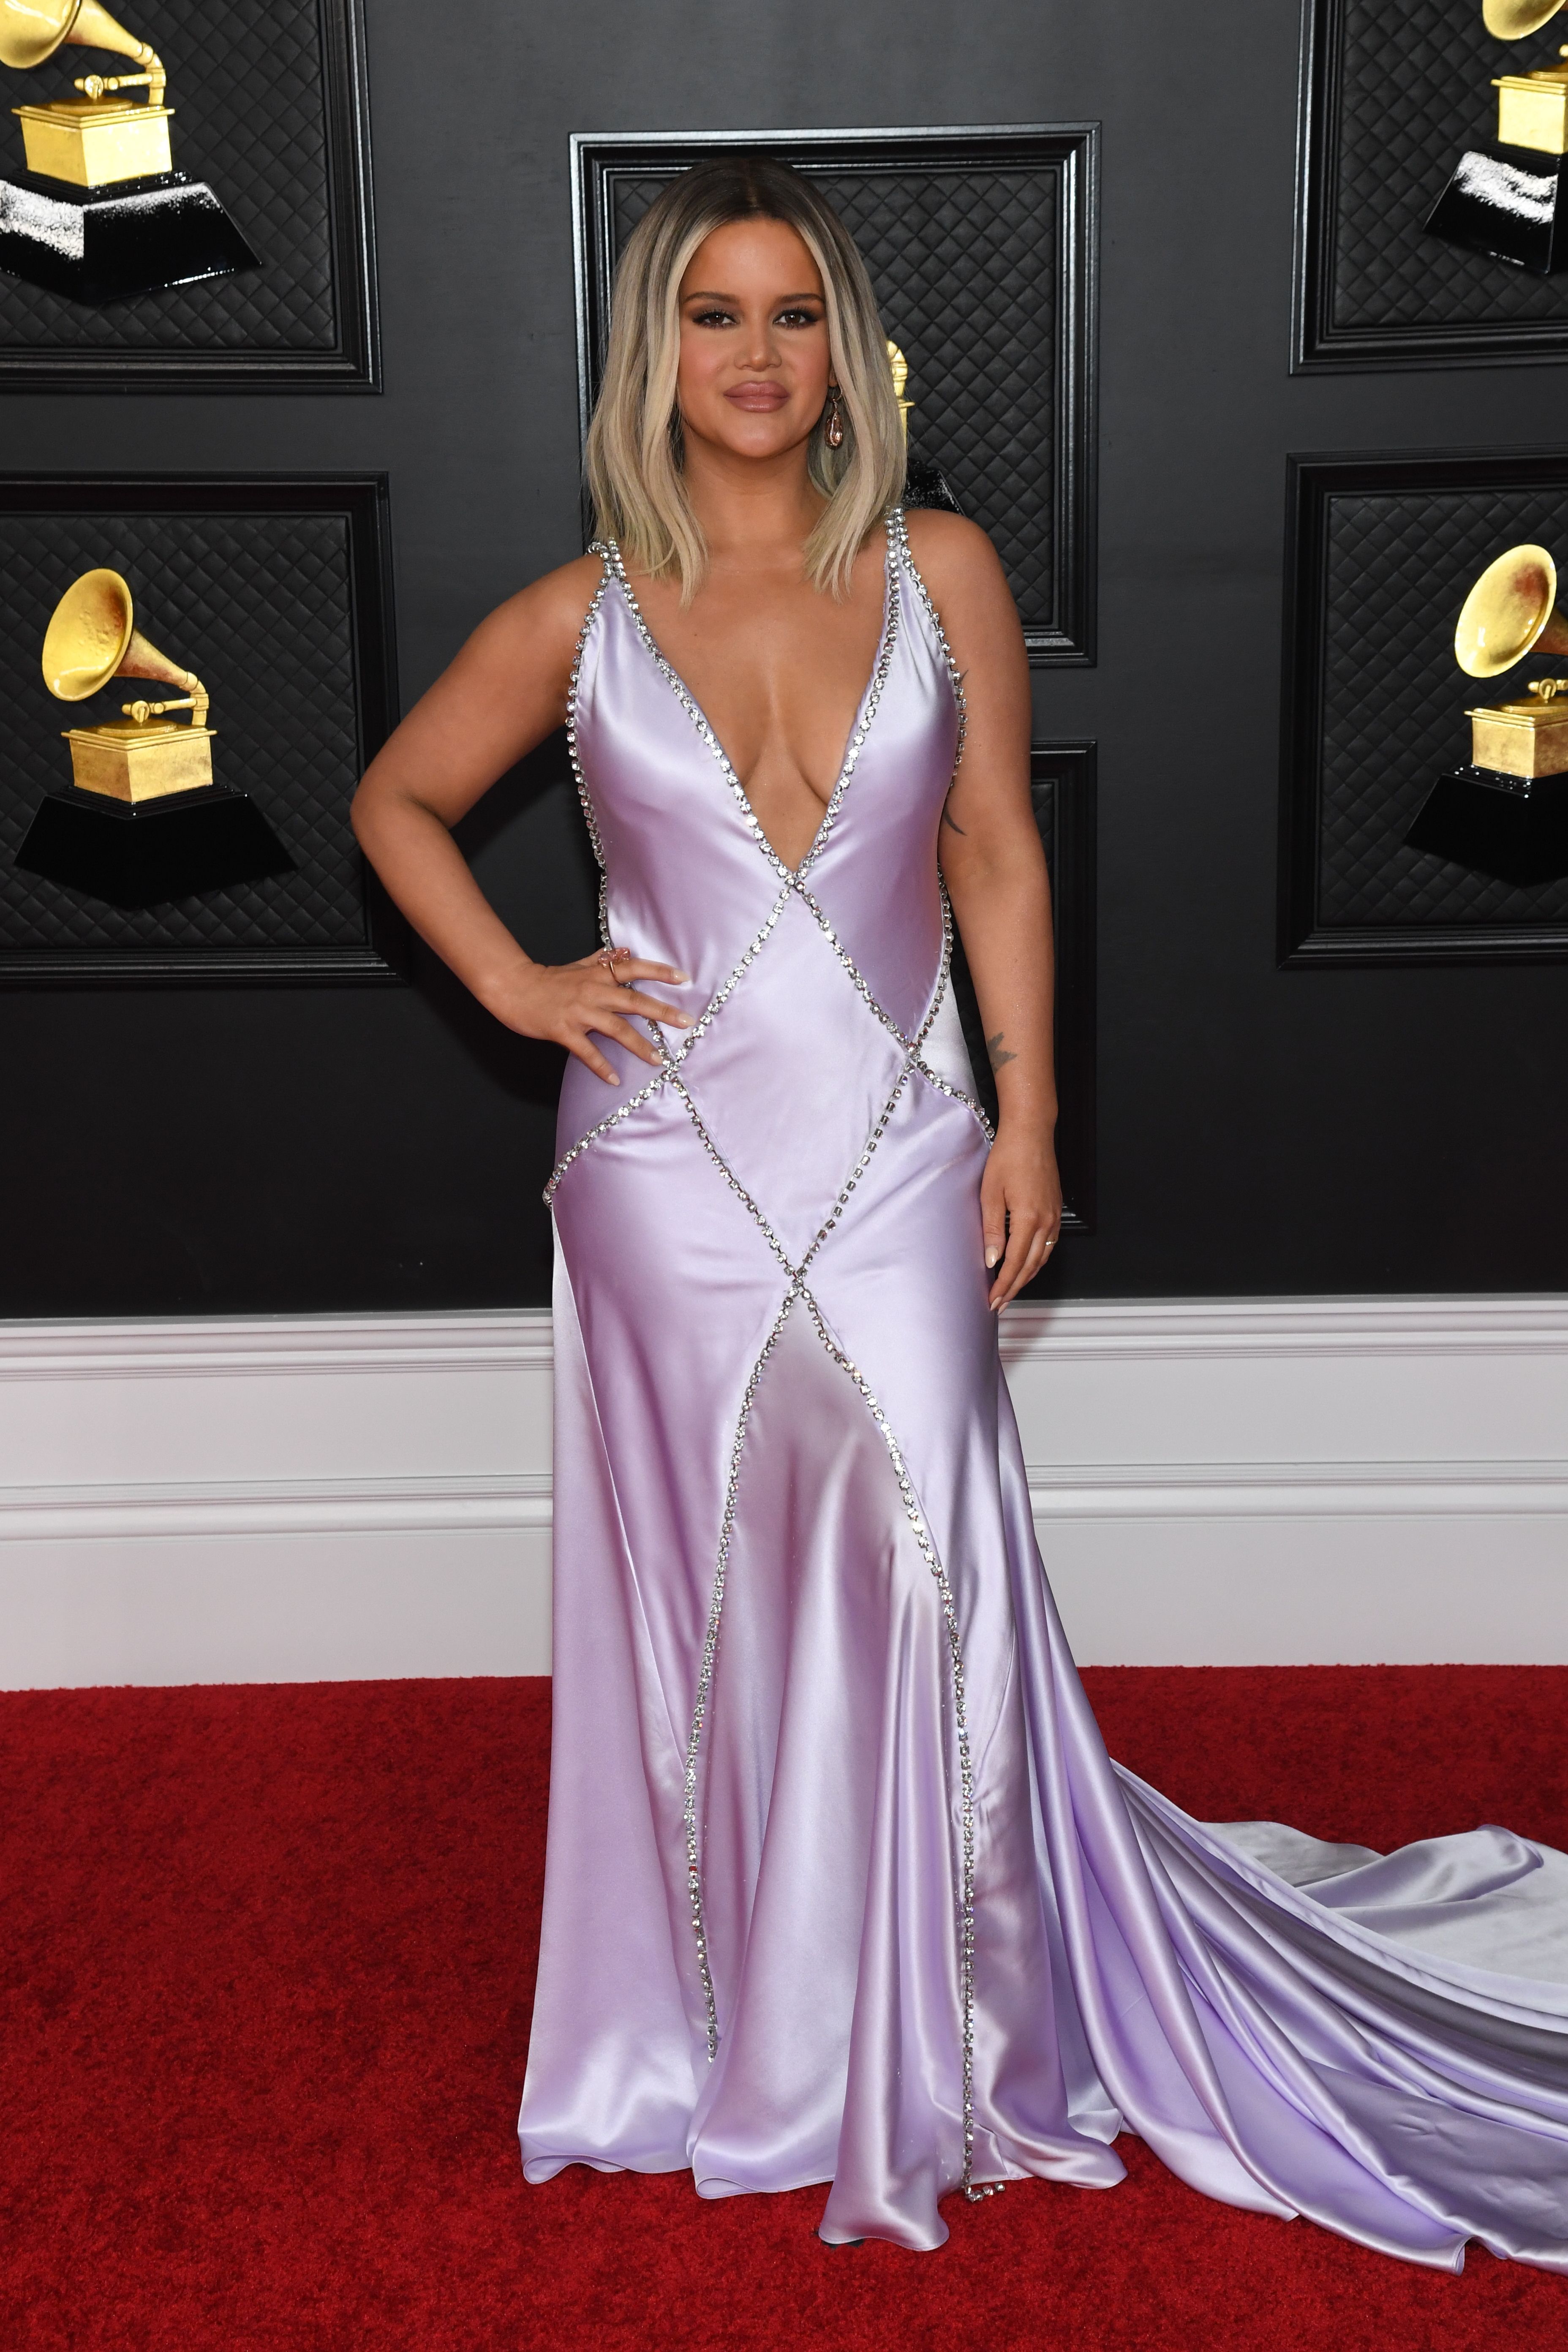 Maren Morris during the 63rd annual GRAMMY AWARDS, broadcast live from the STAPLES Center in Los Angeles, Sunday, March 14, 2021. | Source: Getty Images